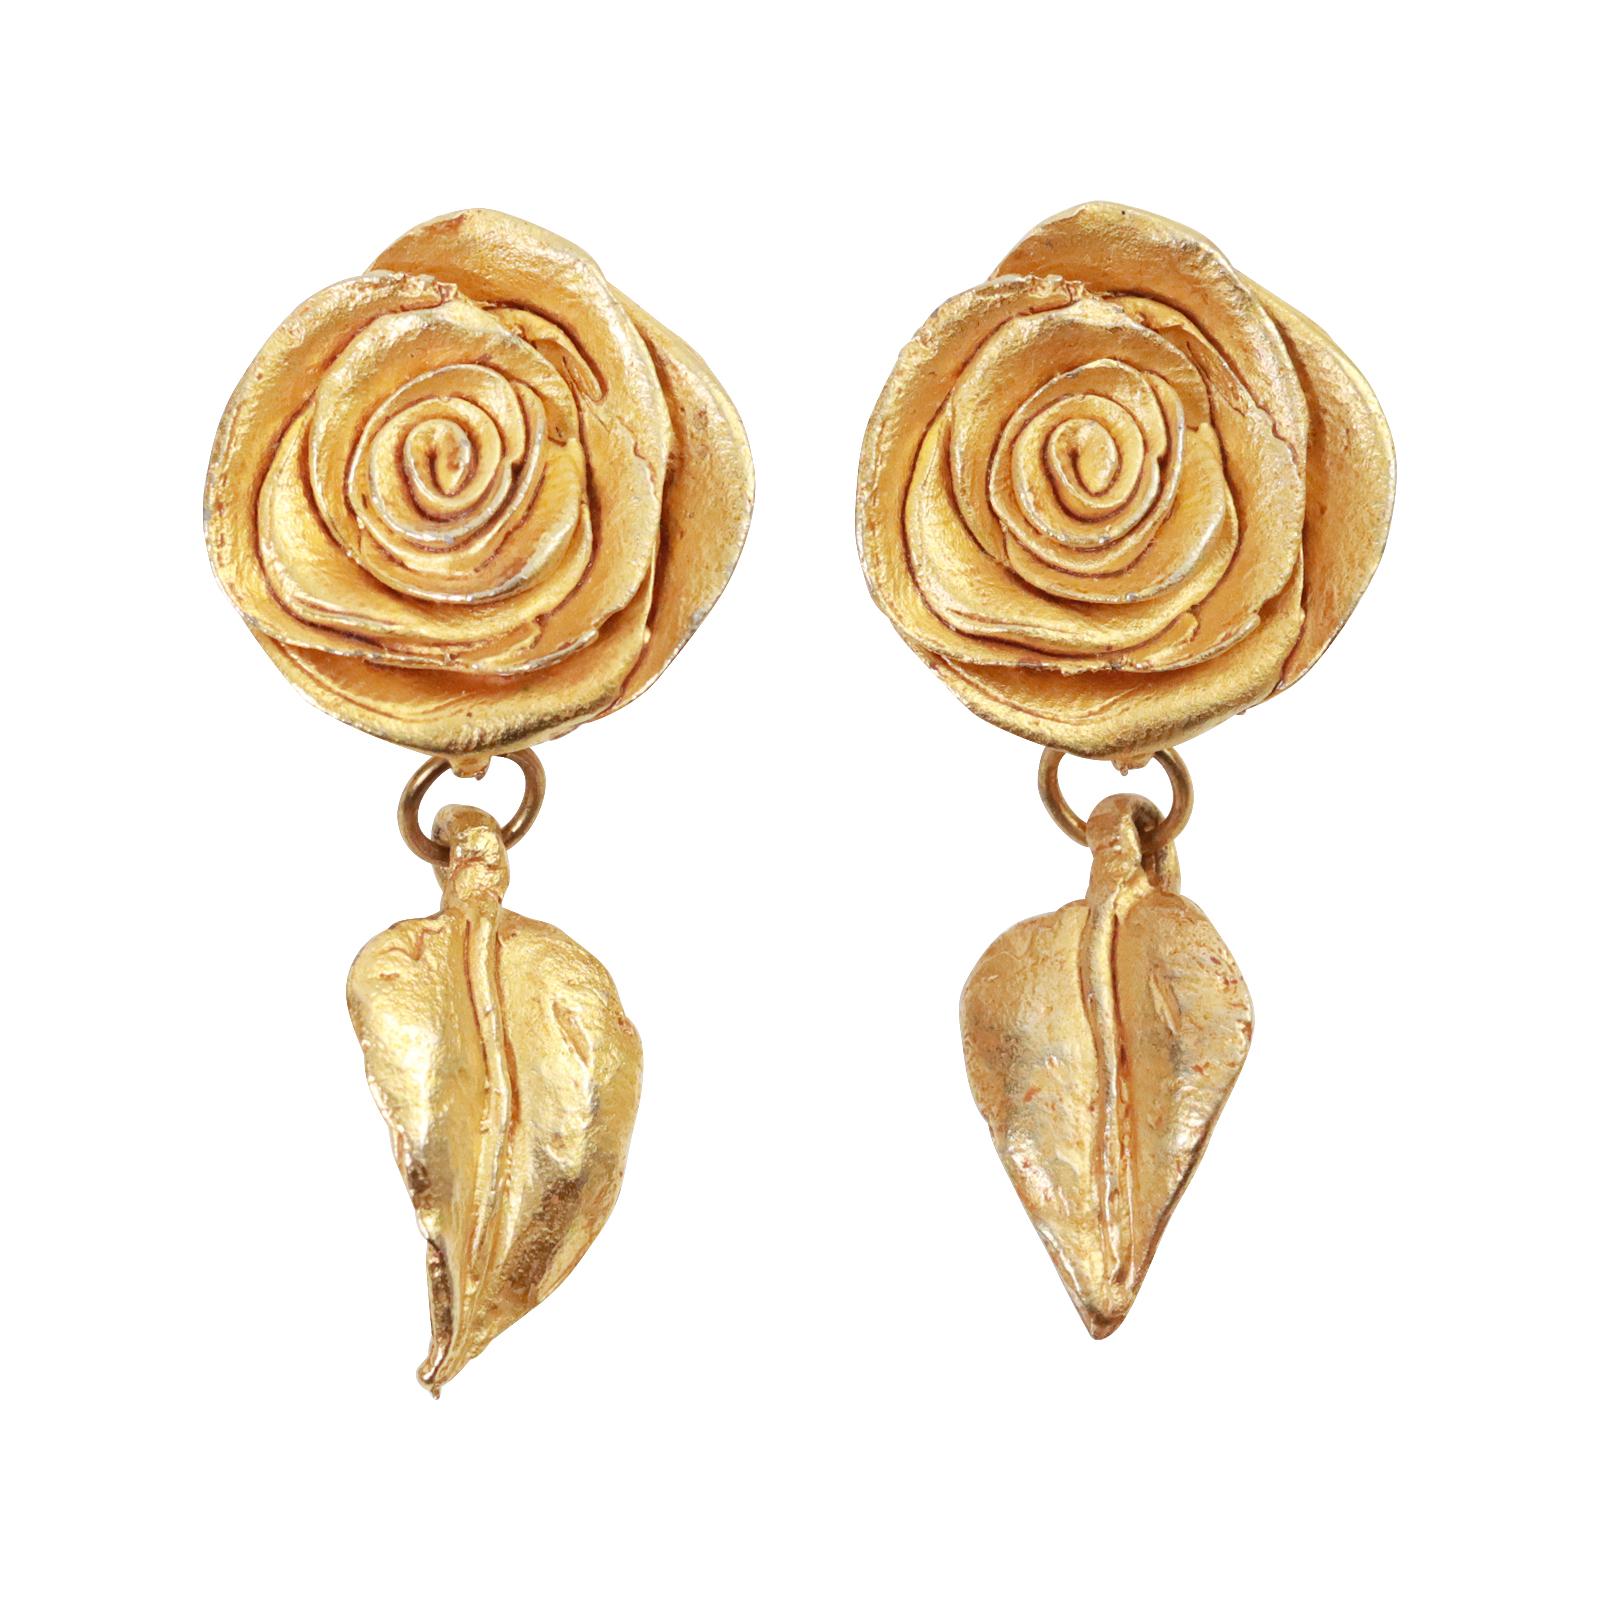 Vintage Kate Hines Gold Tone Flower With Drop Leaf Earrings Circa 1980s. These are some of the most gorgeous earrings ever and so well made.  The top is a rose that is a free form in matte gold that is just stunning and has a leaf that drops below.